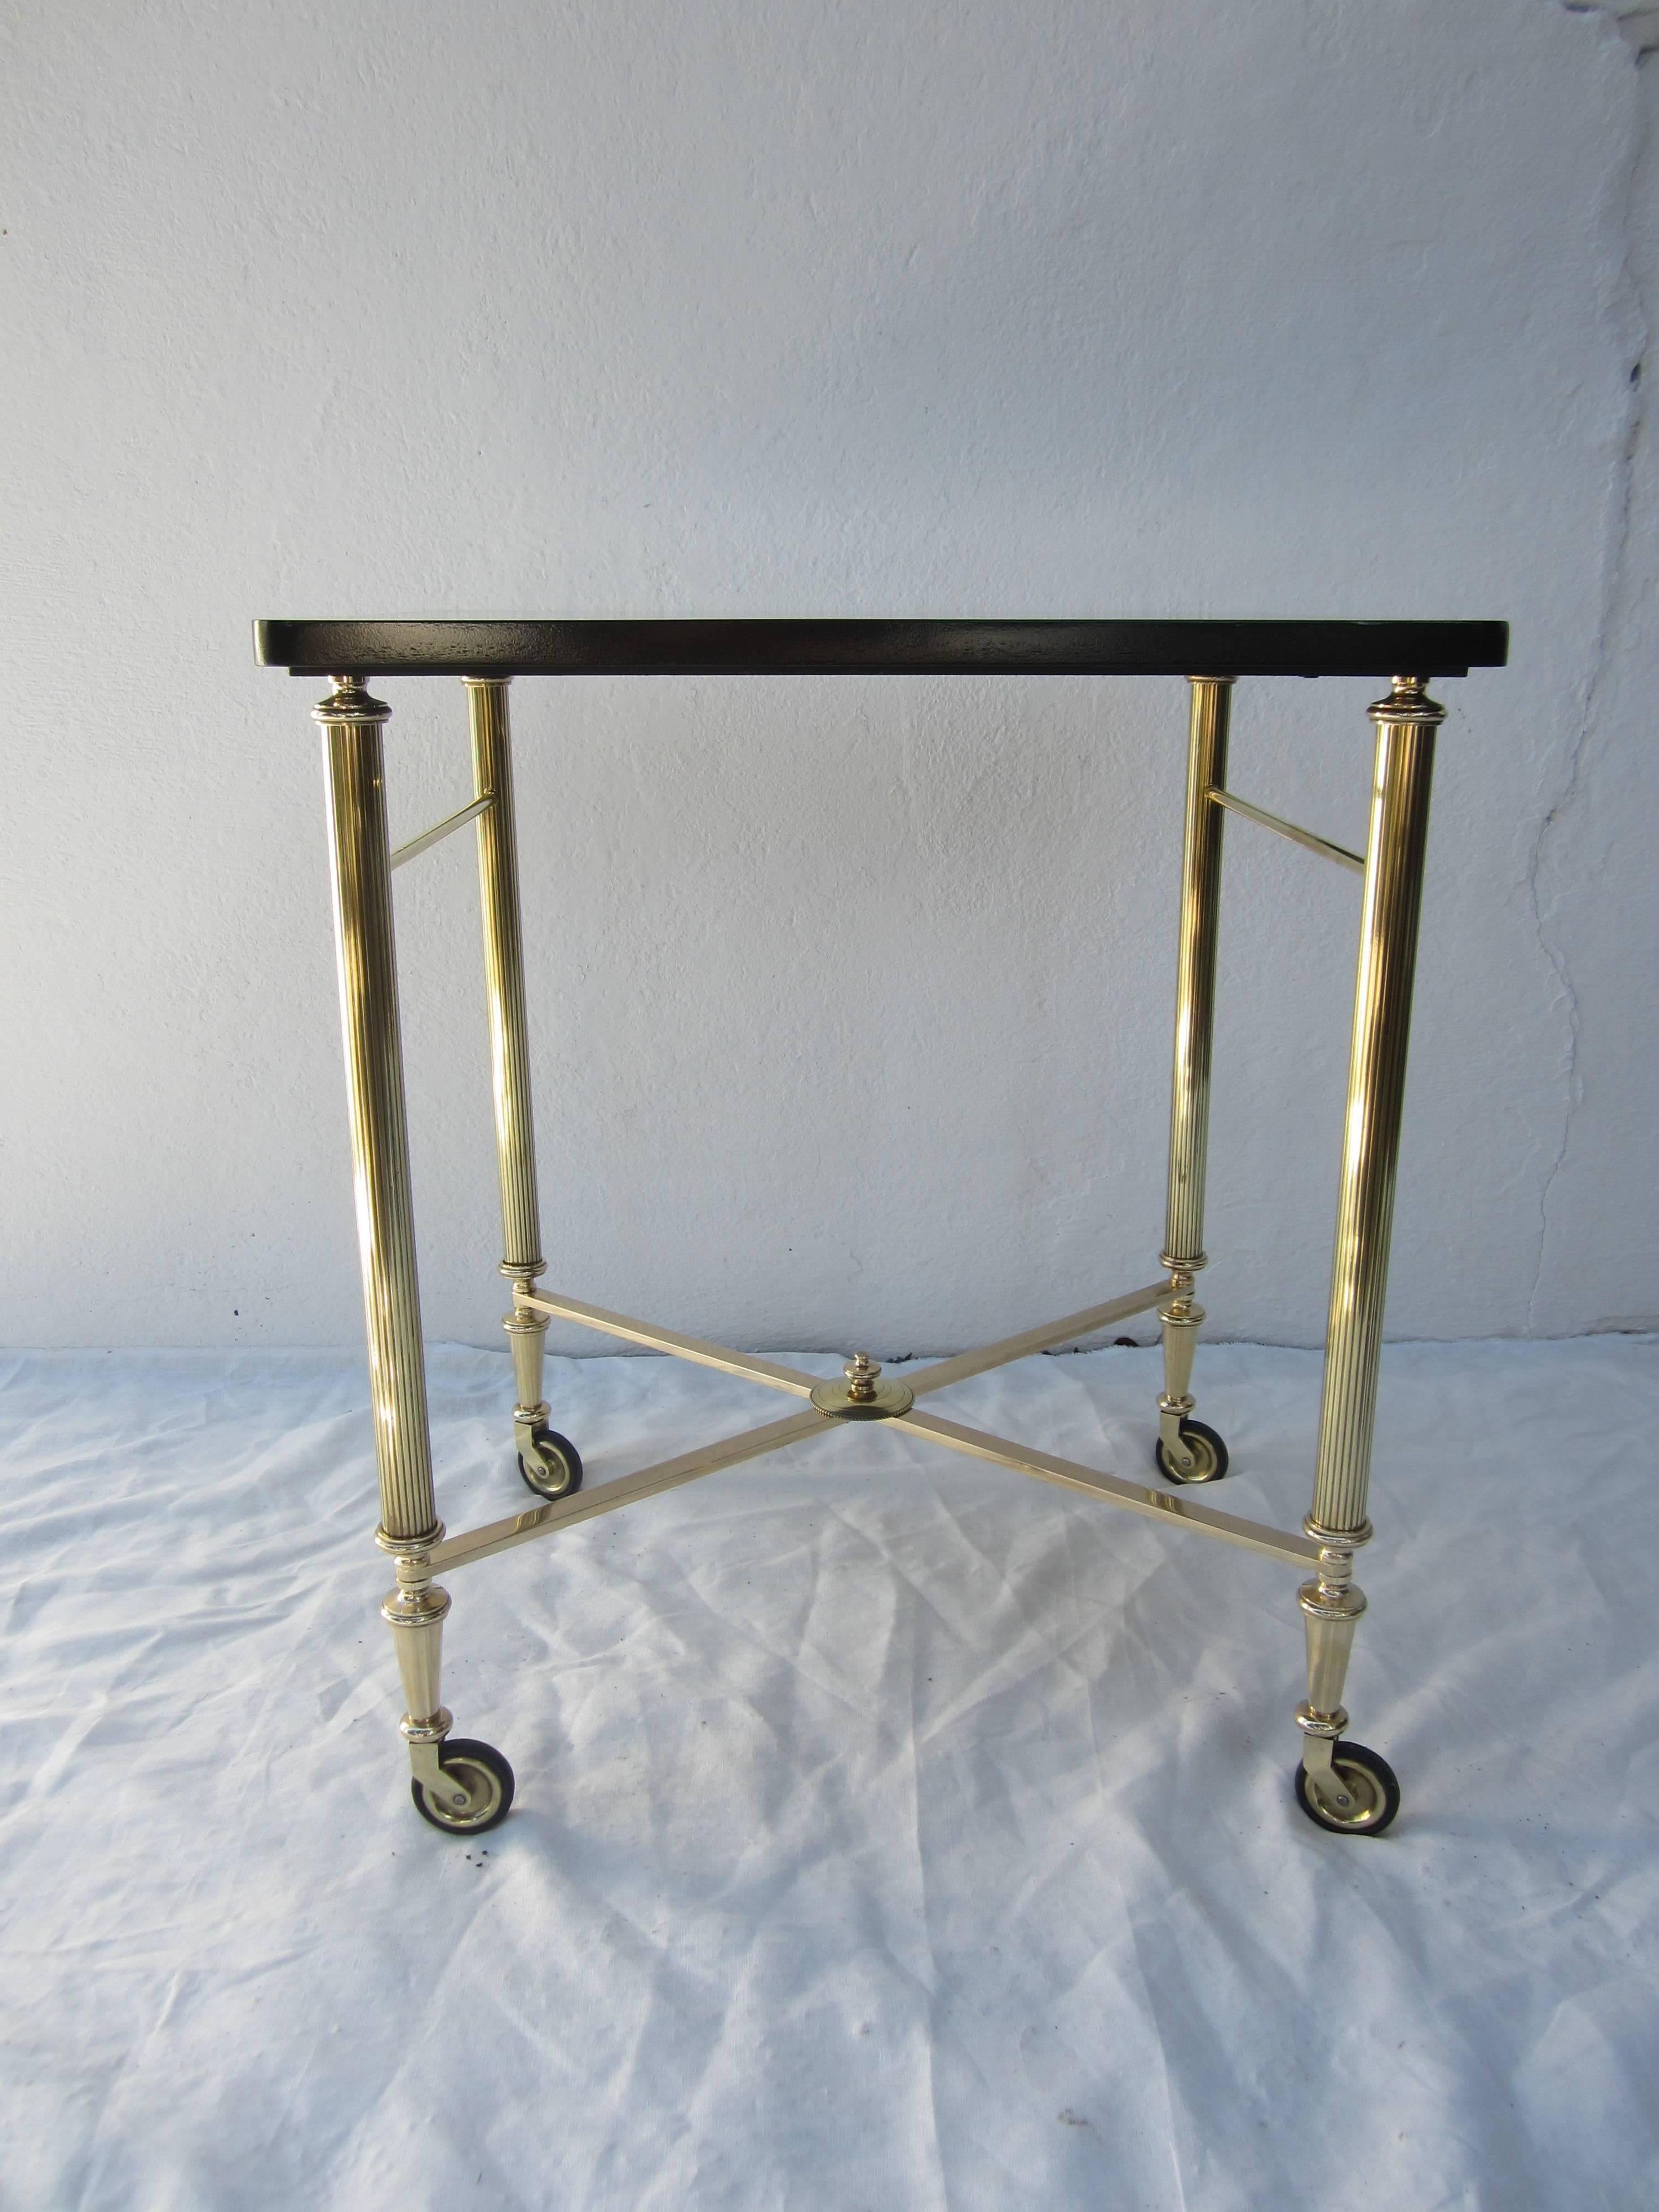 Brass cart with a newly refinished wood top. Can be used as a tea or bar cart as well as a side table.